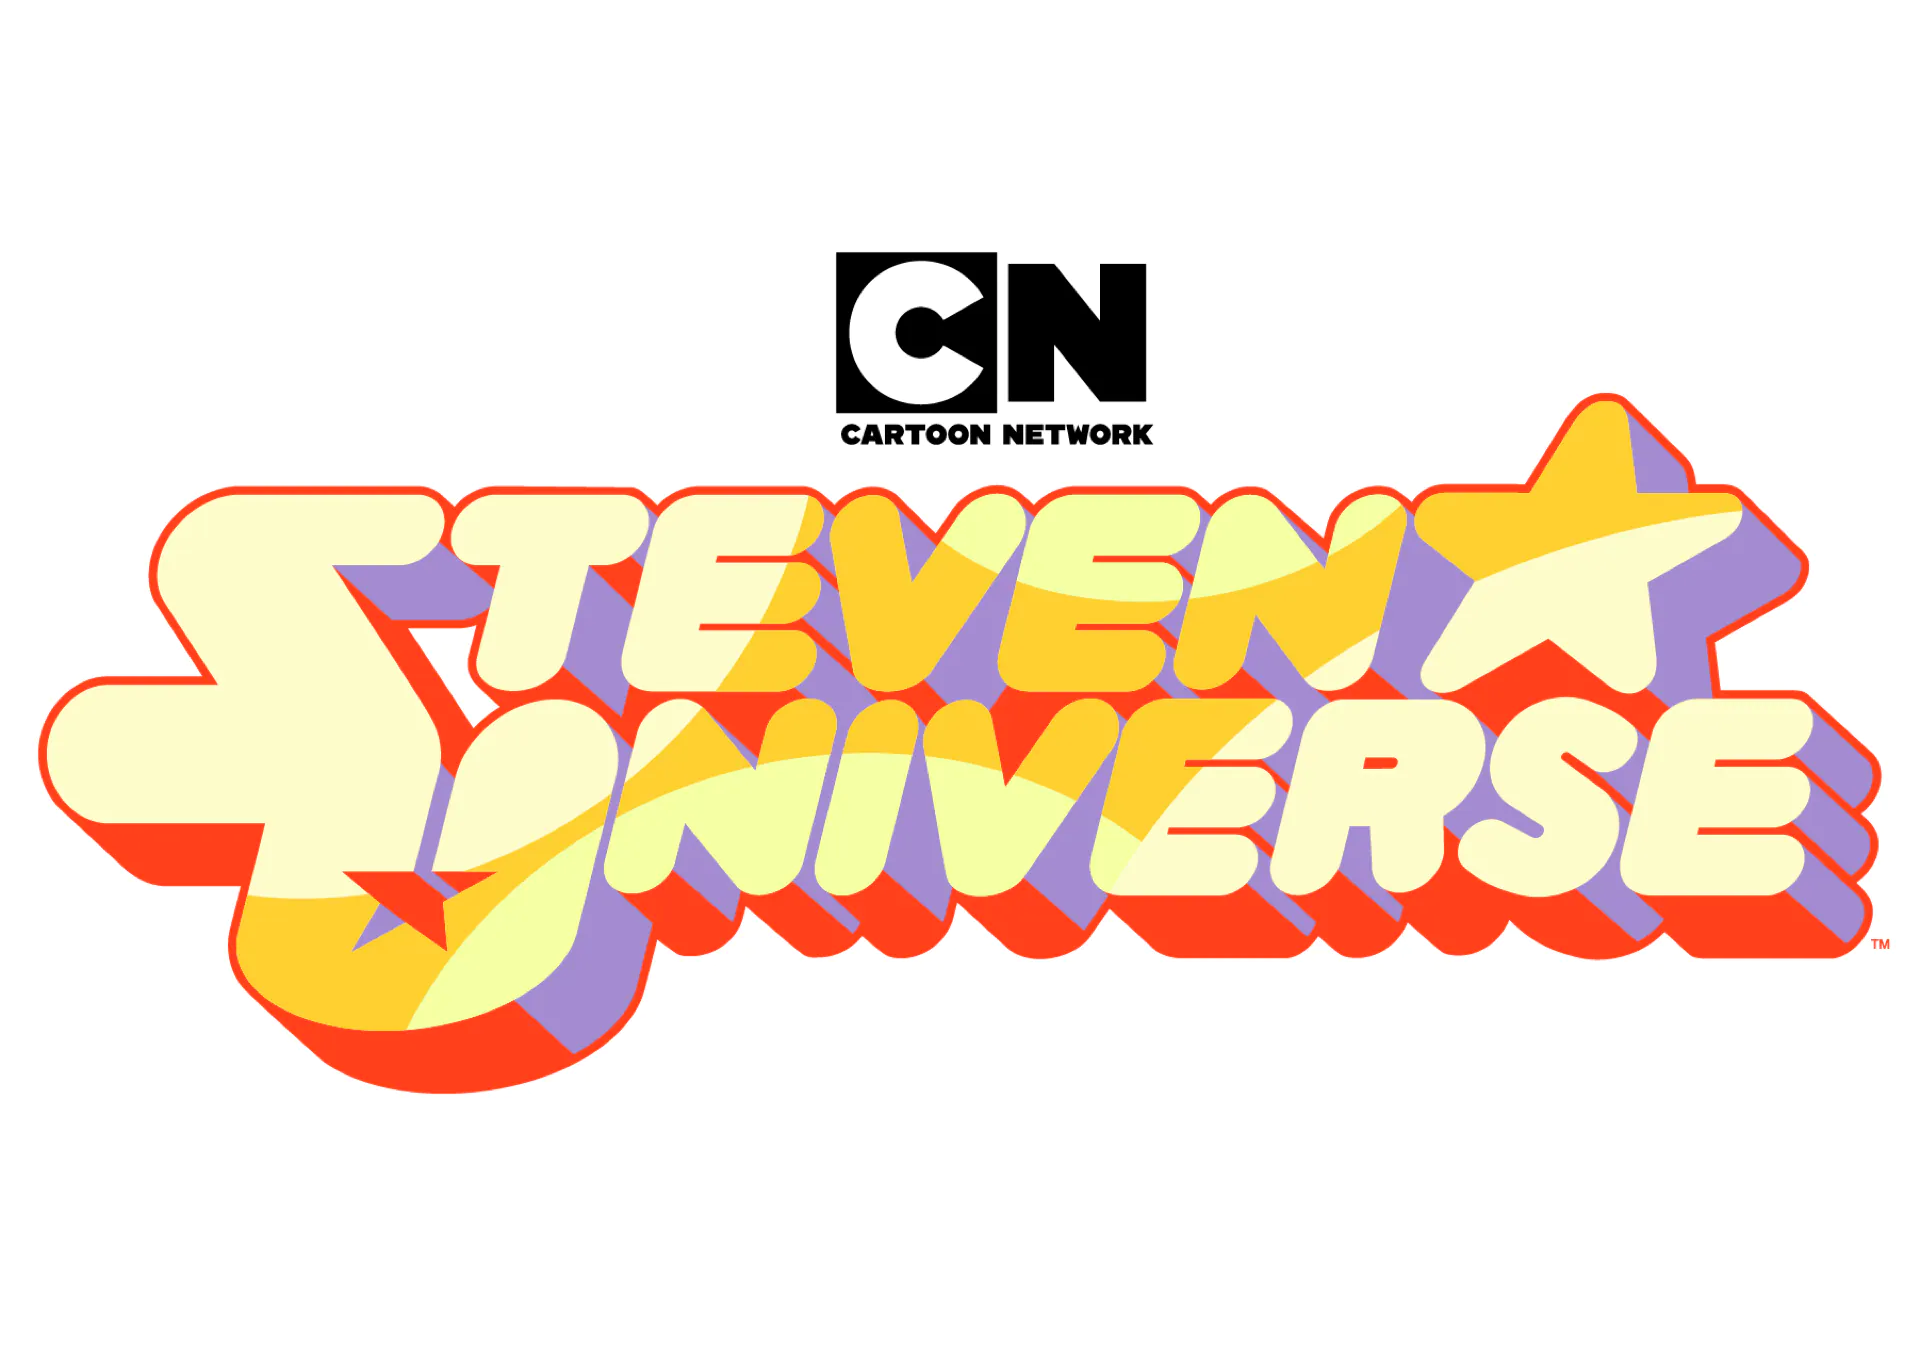 Steven Universe, Watch free videos and play Steven Universe Games